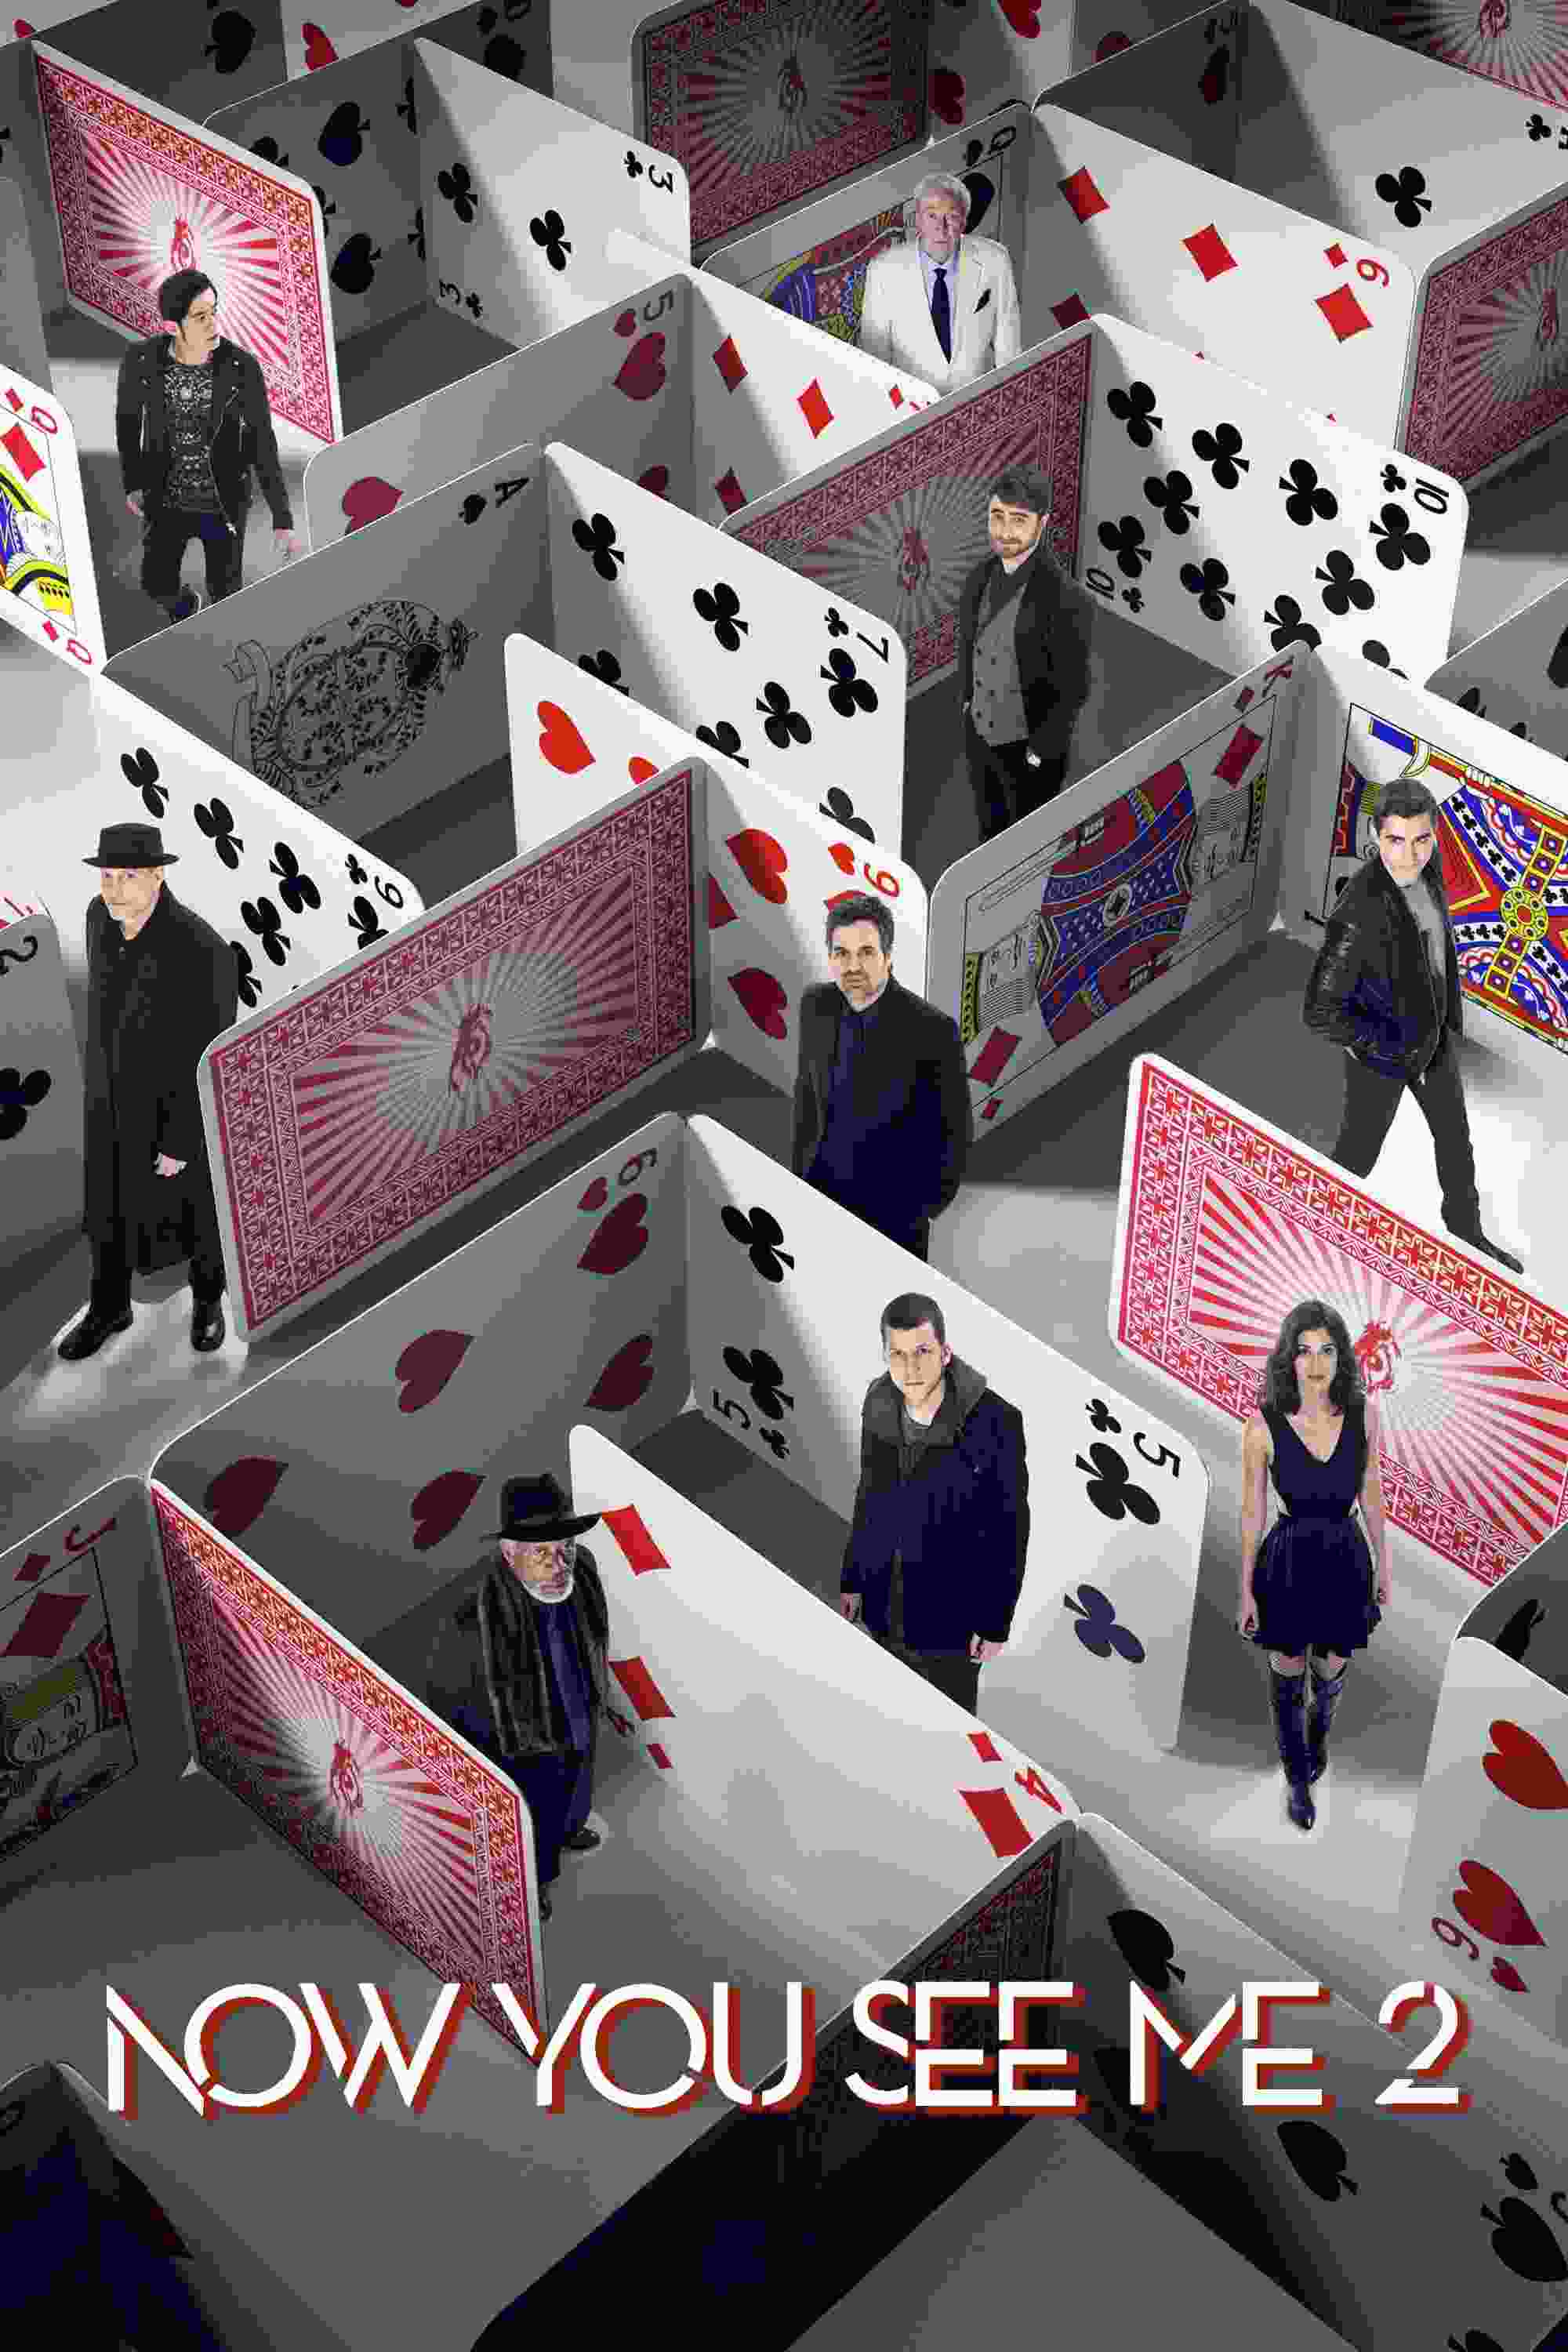 Now You See Me 2 (2016) Jesse Eisenberg